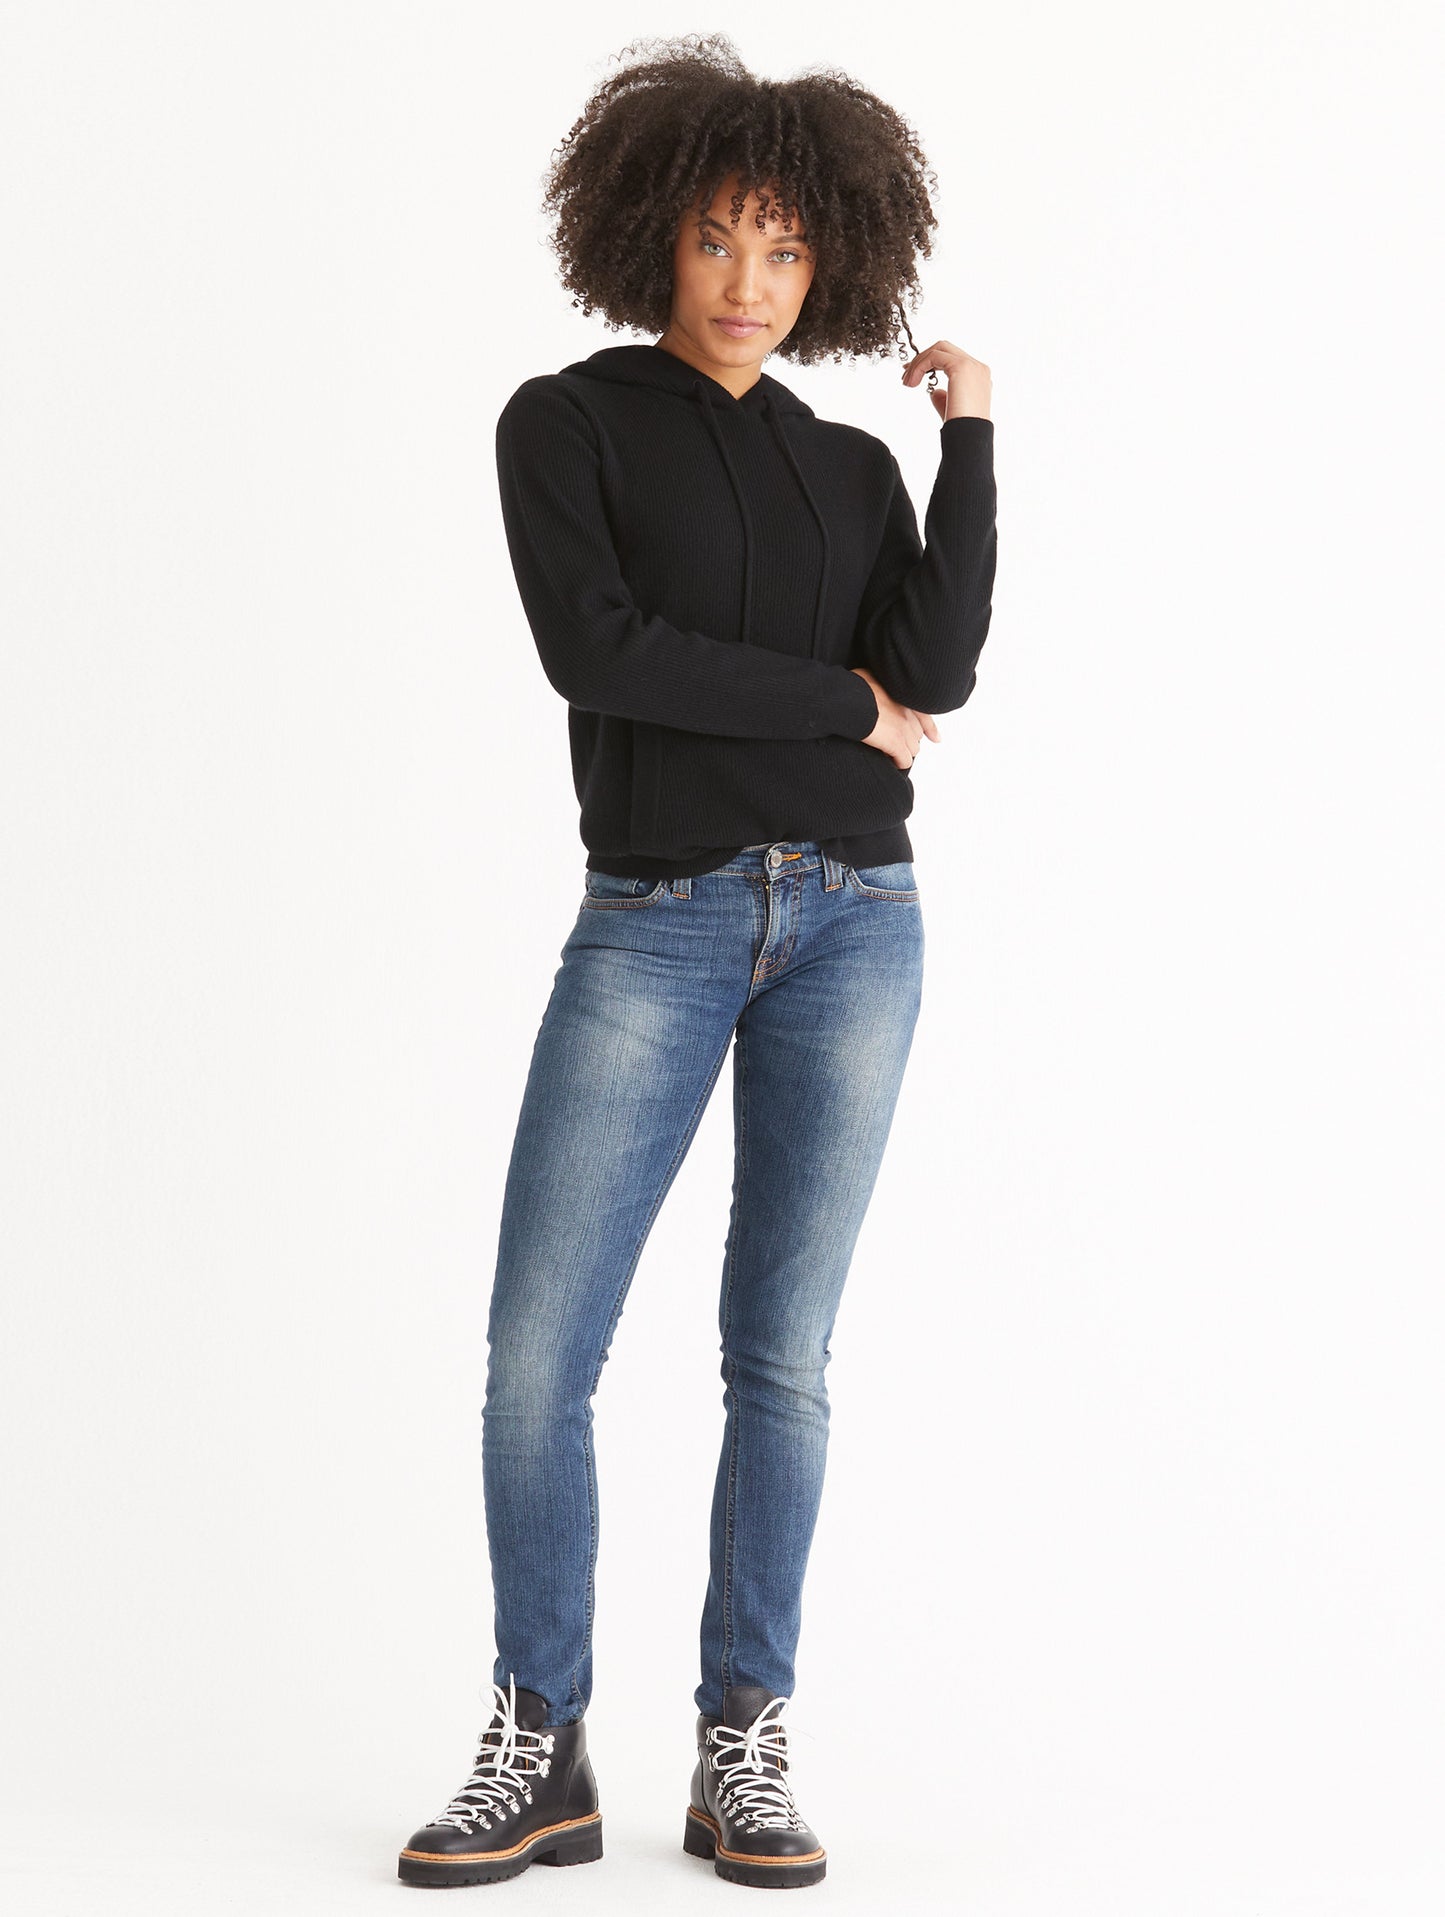 black sweater for women from Aether Apparel